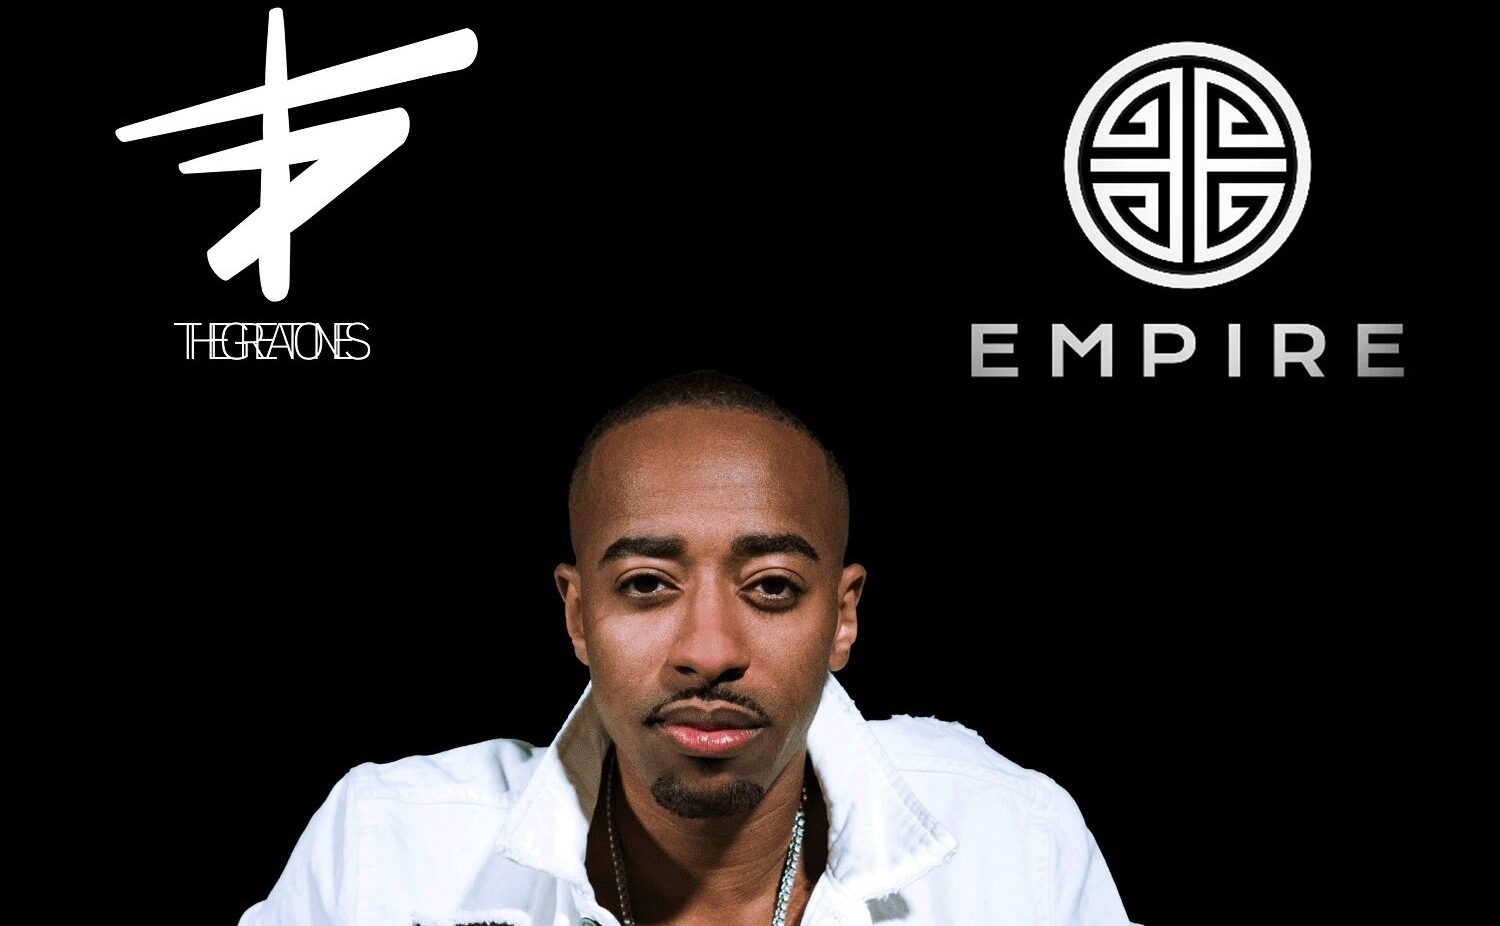 Nathaniel The Great Inks Partnership Deal with Empire To Launch New Label TheGreatOnes